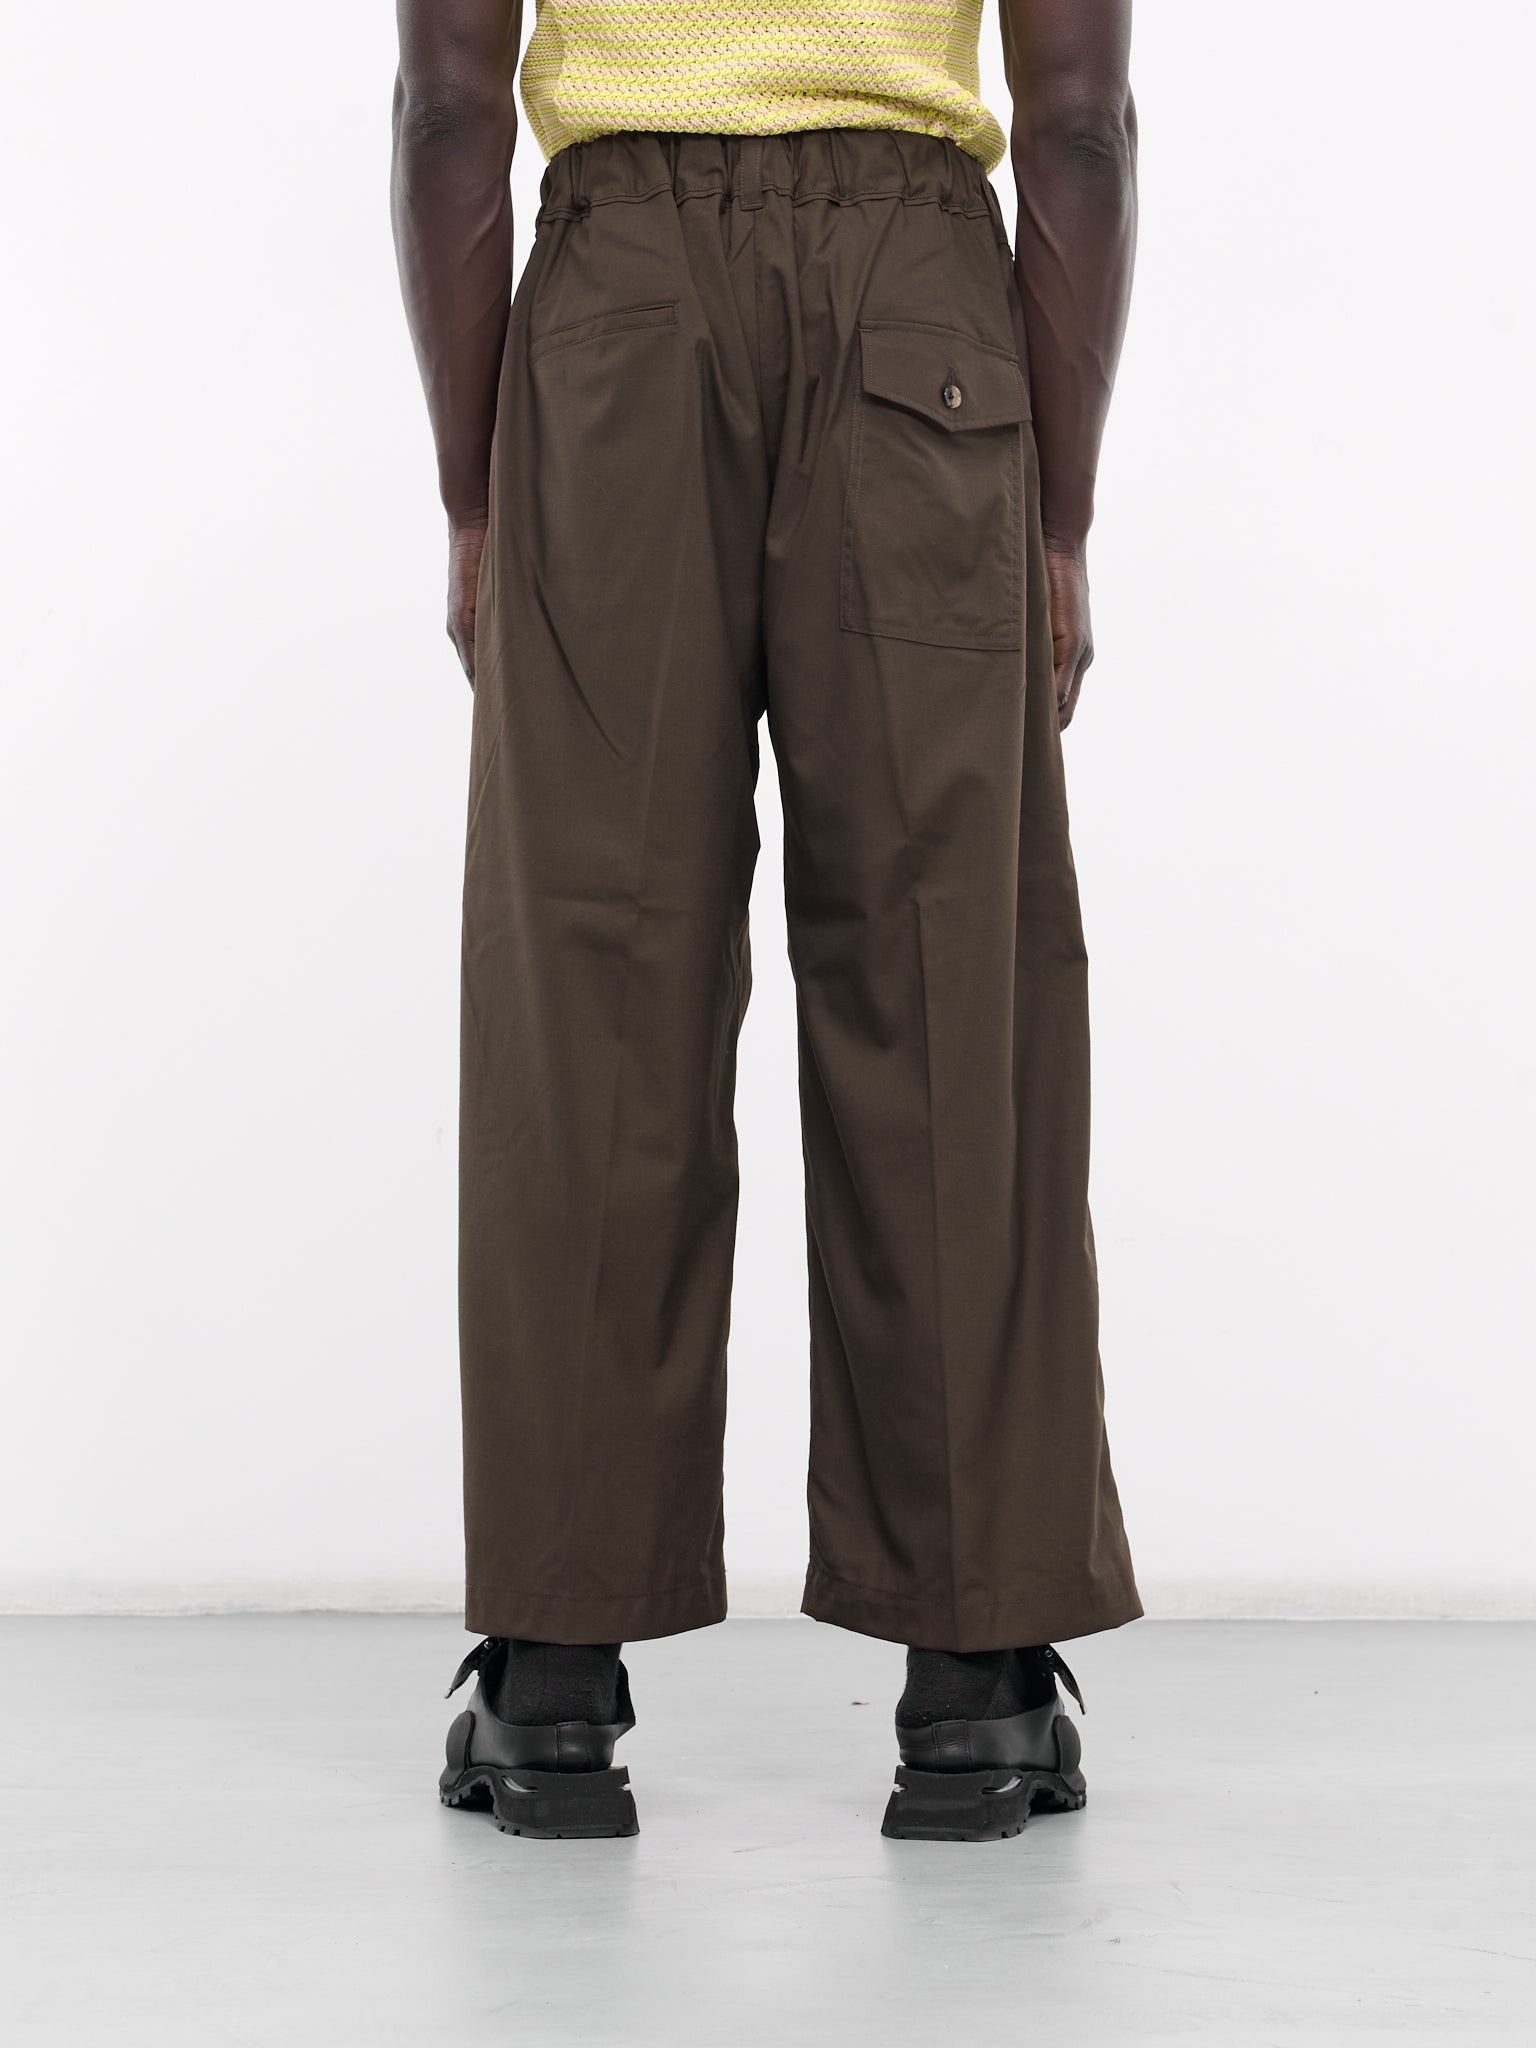 Elasticated Pocket Trousers (SLEC-HPTW-BRW-BROWN)